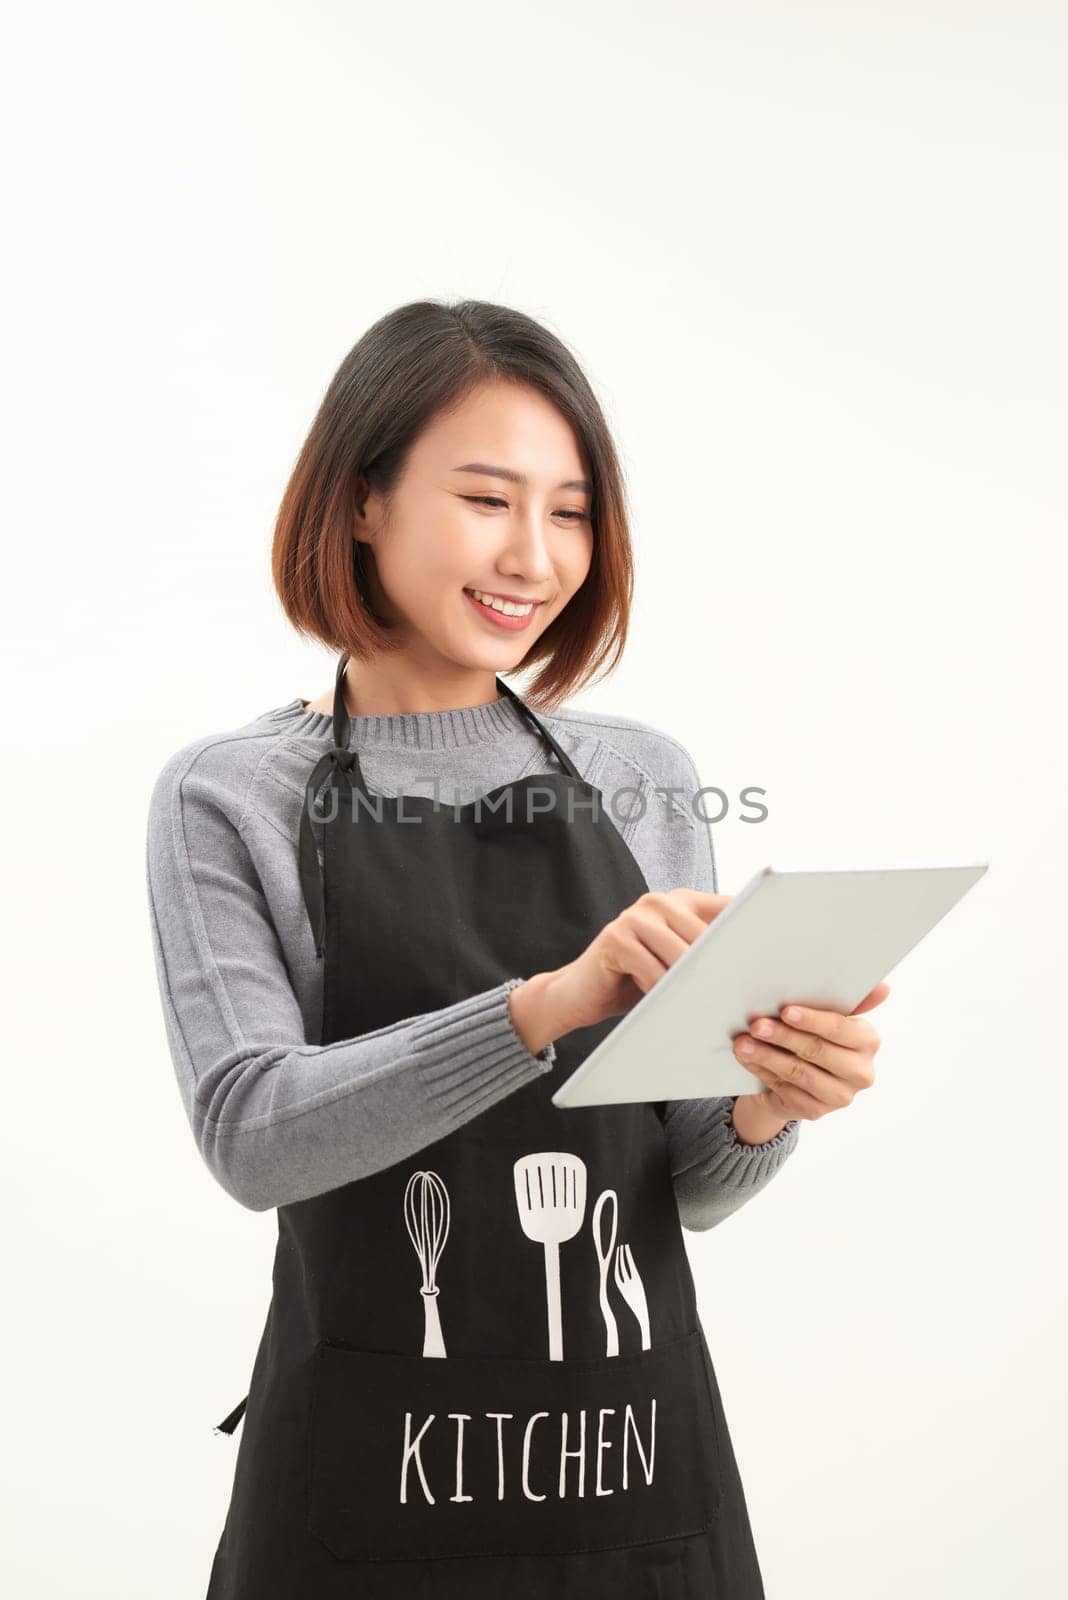 Successful hypermarket employee with black apron holding modern tablet isolated on white background with copyspace by makidotvn